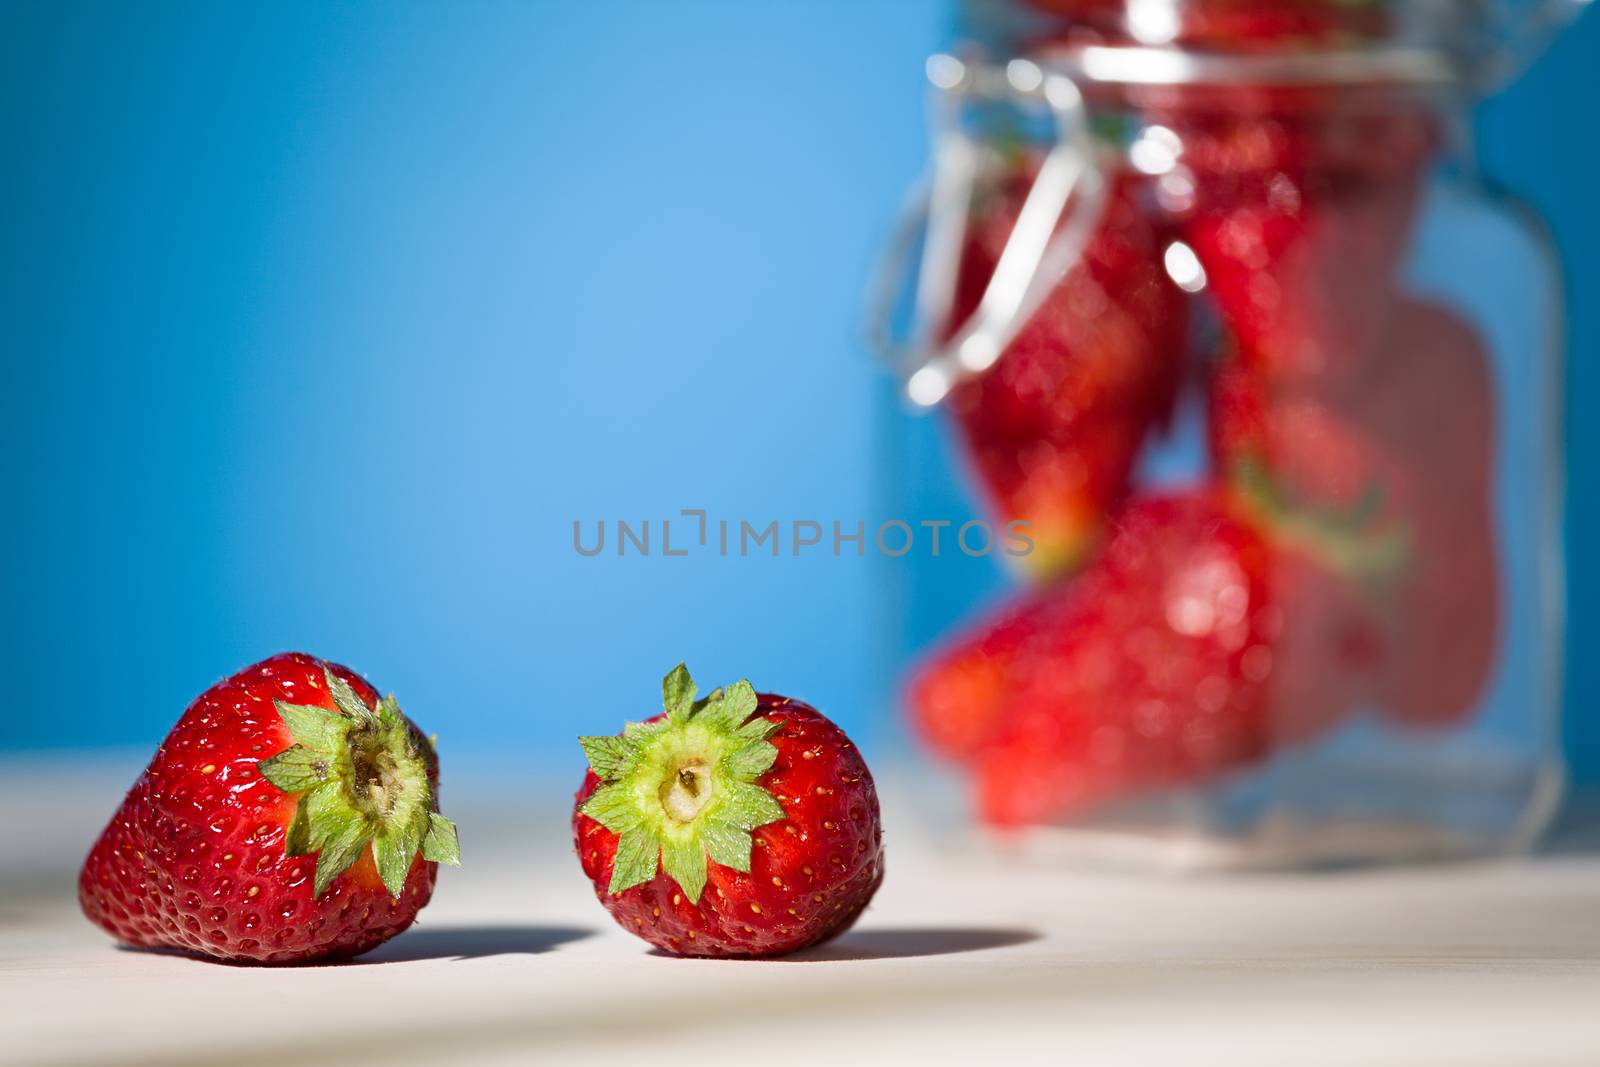 Close up of two strawberries on a table with blue background and a glass jar full of strawberries on the background